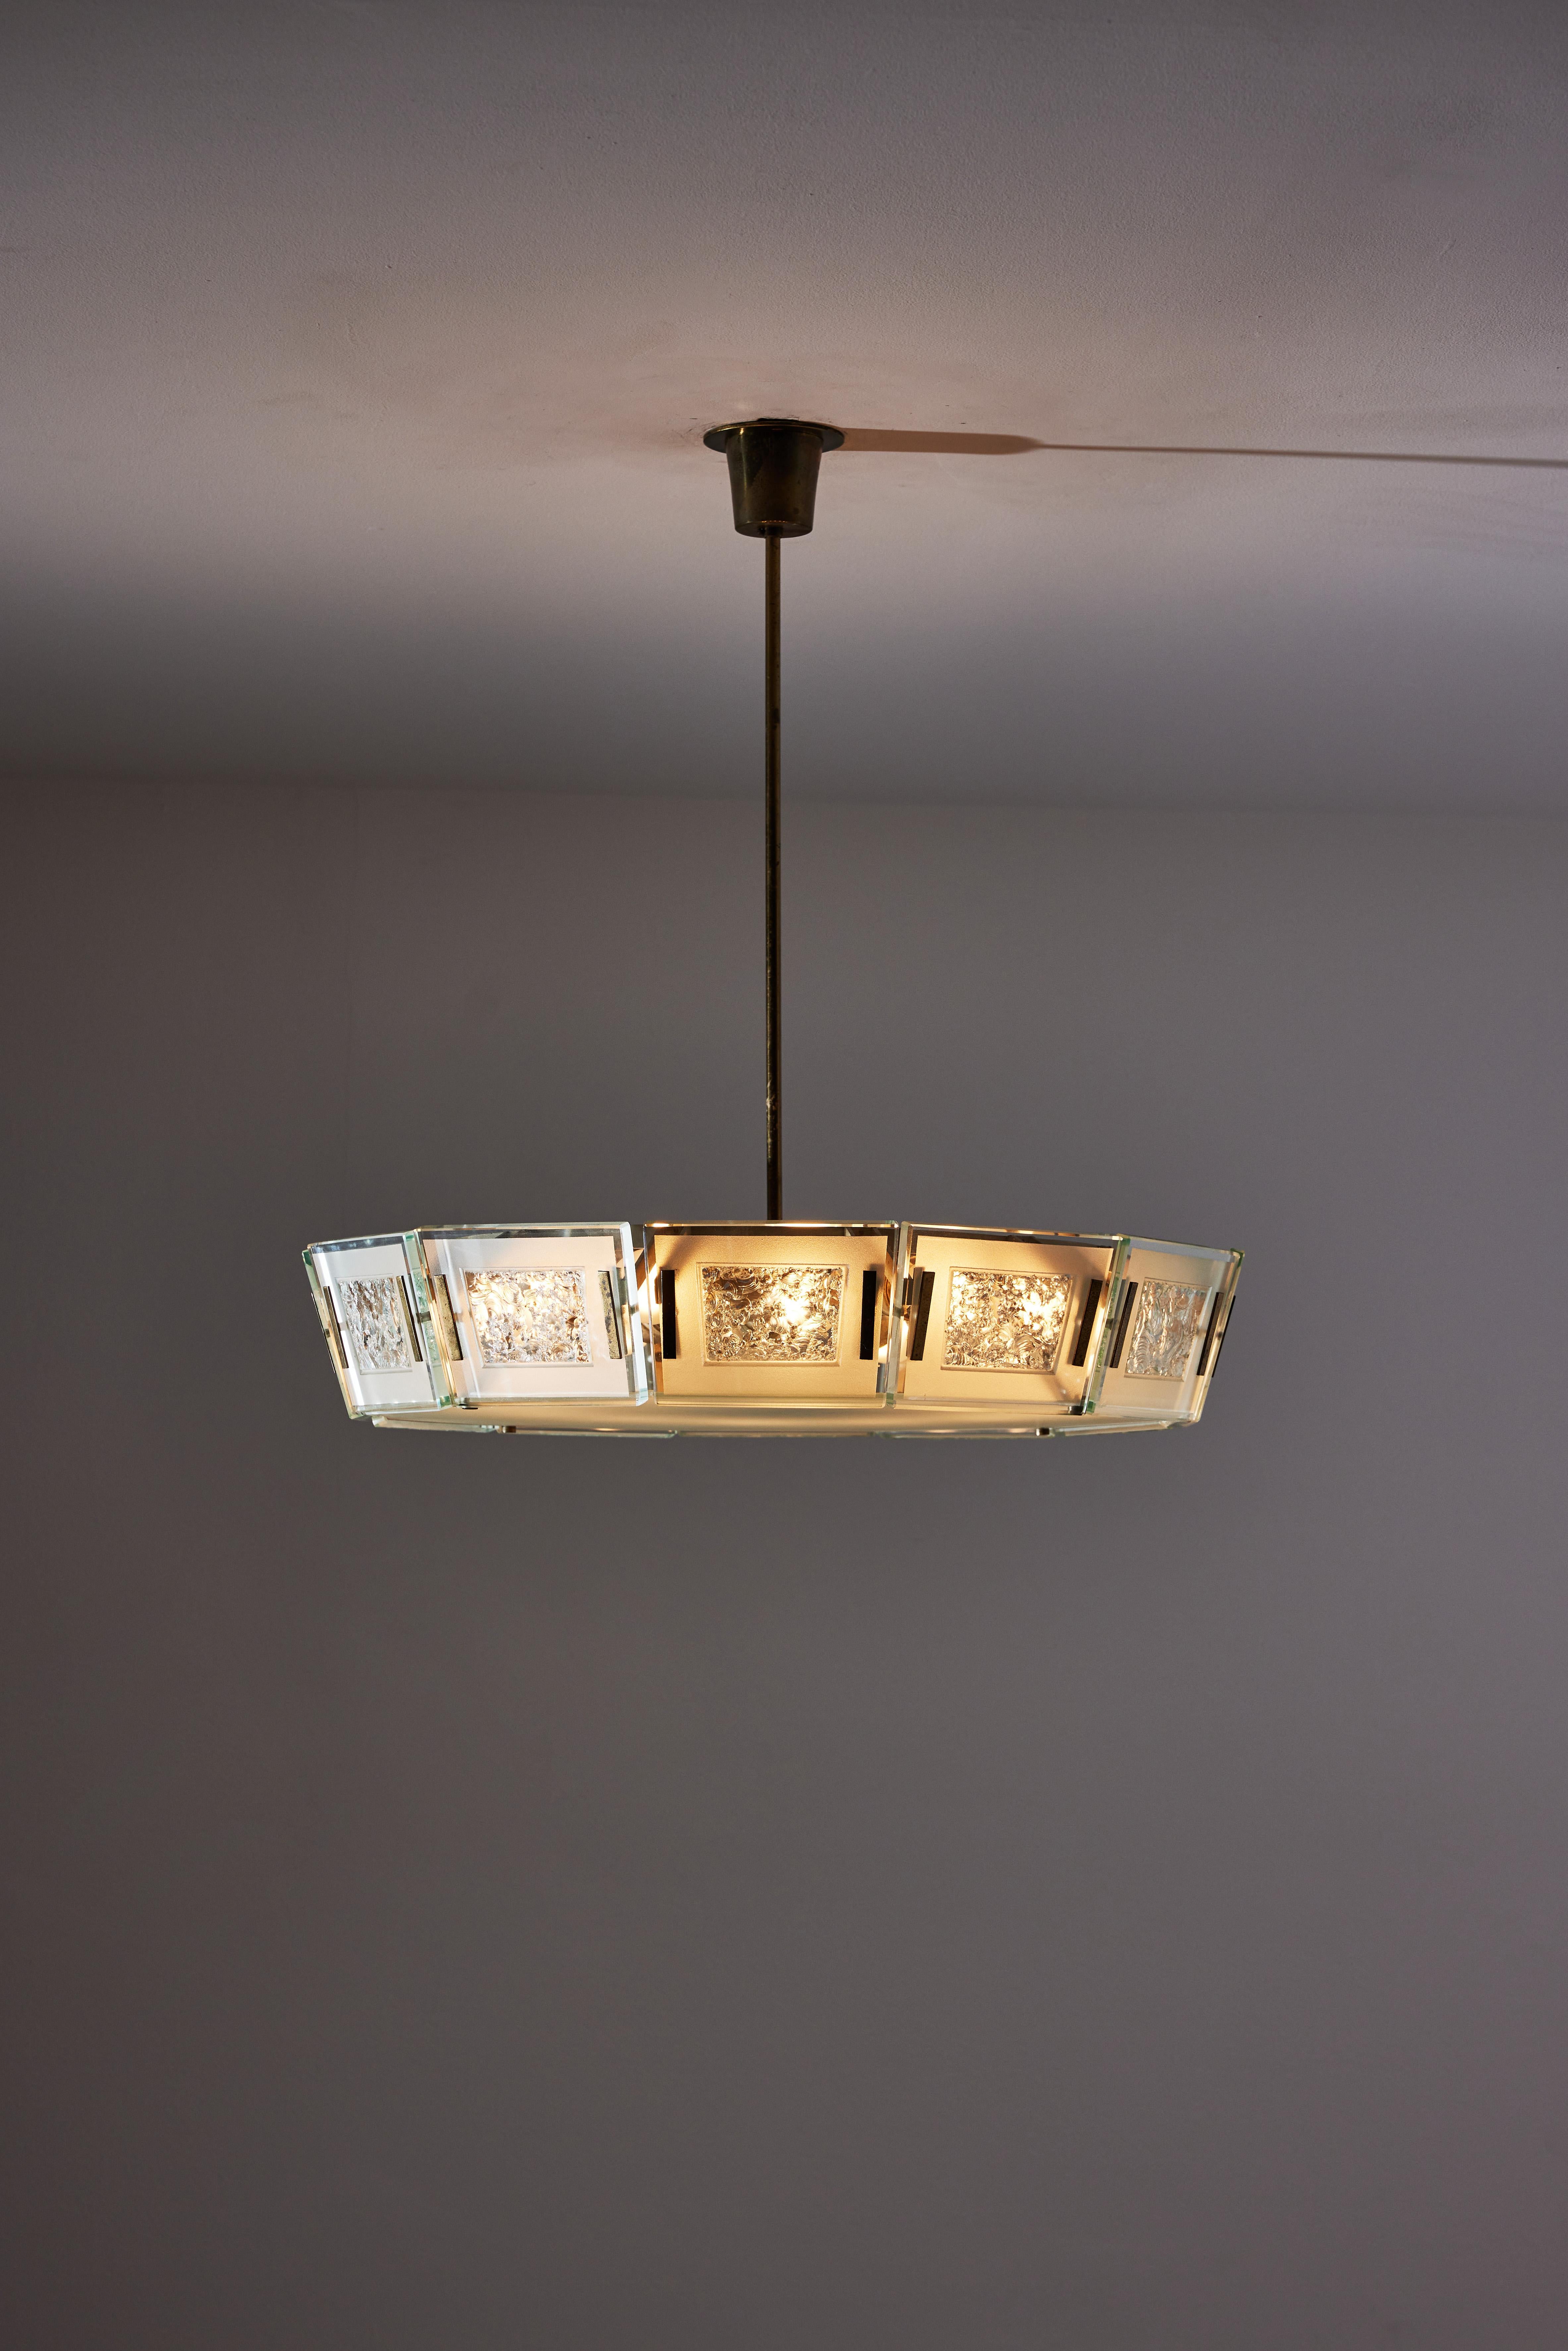 Model 2270 ceiling light by Max Ingrand. Designed and manufactured in Italy, circa 1950s. Satin finish crystal glass diffuser with satin finish crystal chiseled panels. Brass stem and custom brass ceiling plate. Rewired for U.S. standards. We